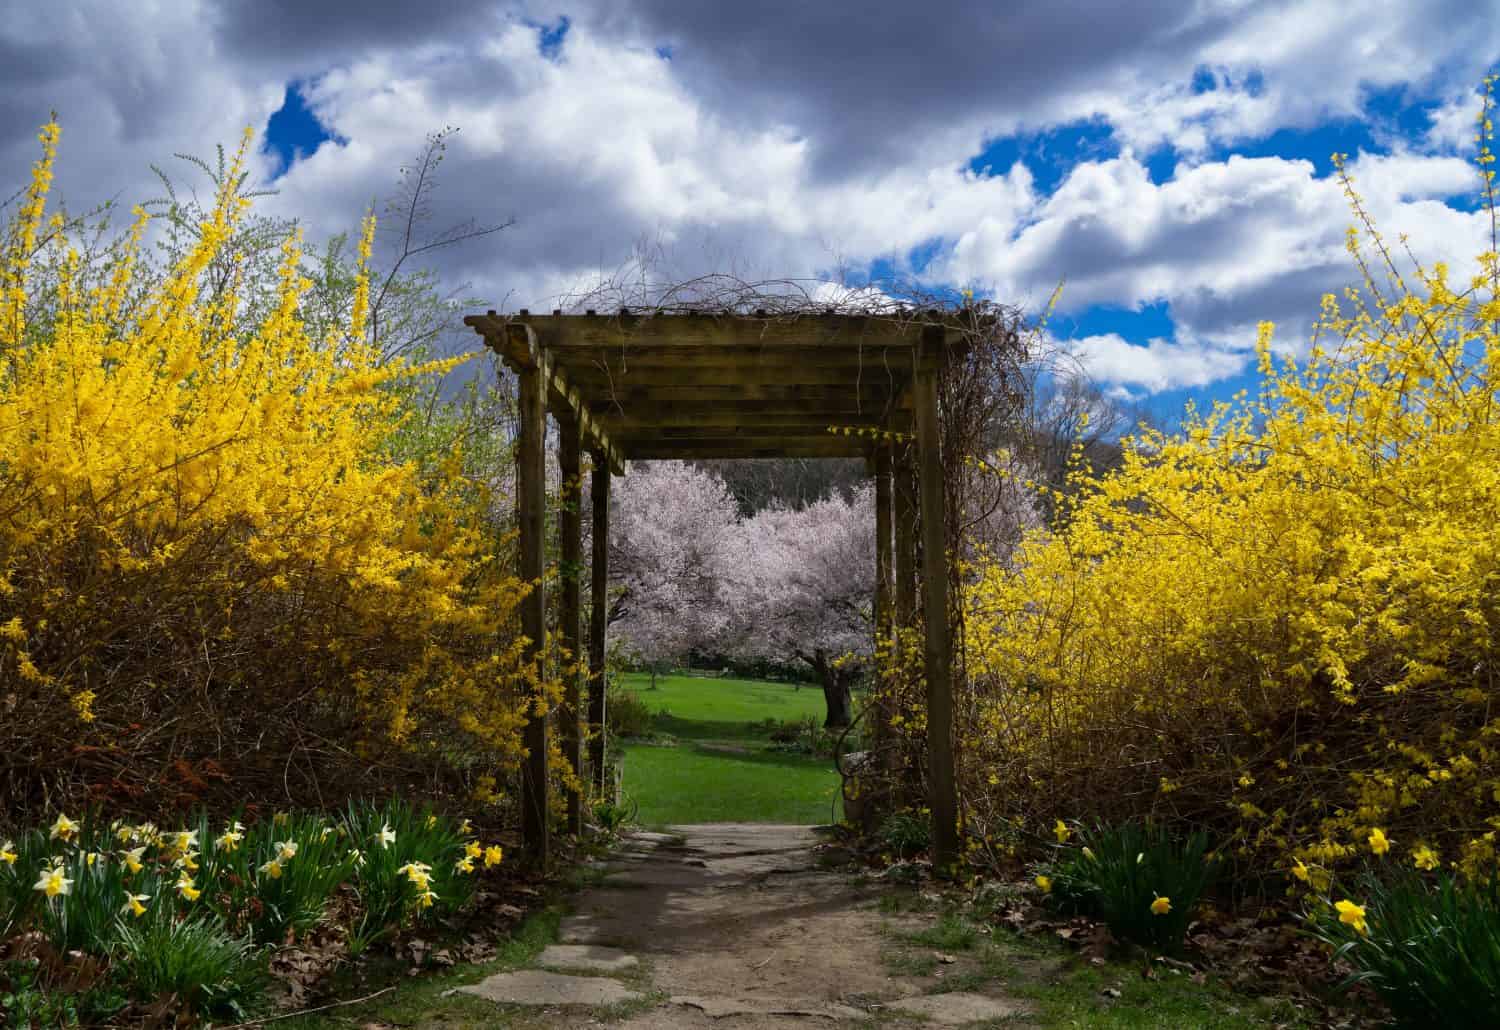 Spring flowers and beautiful skies paint beautiful landscape at the New Jersey Botanical Gardens. 